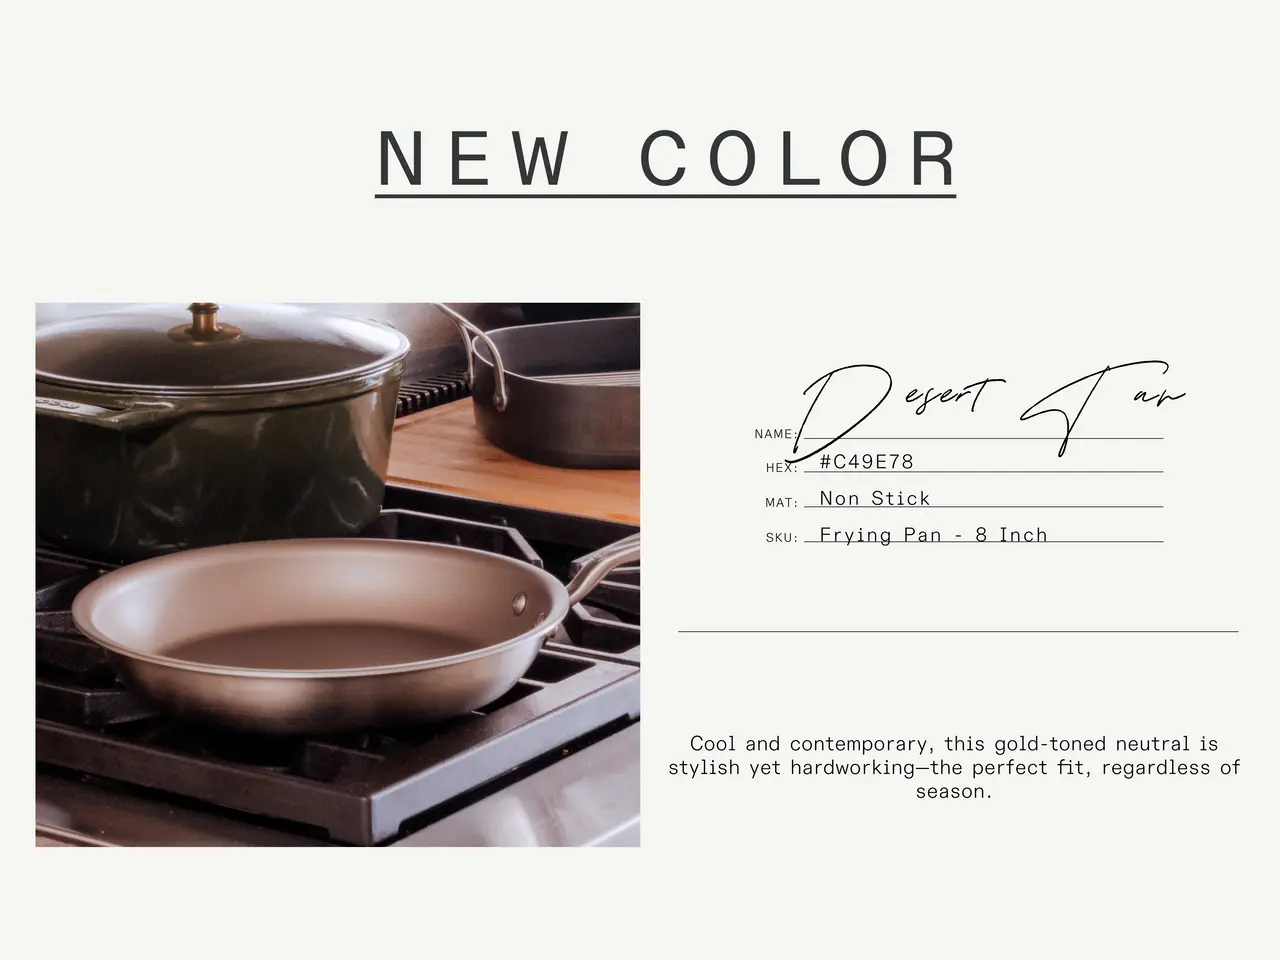 An advertisement image featuring a new color option for a non-stick frying pan, showcasing the pan's details and description, presented on a kitchen stove setting.